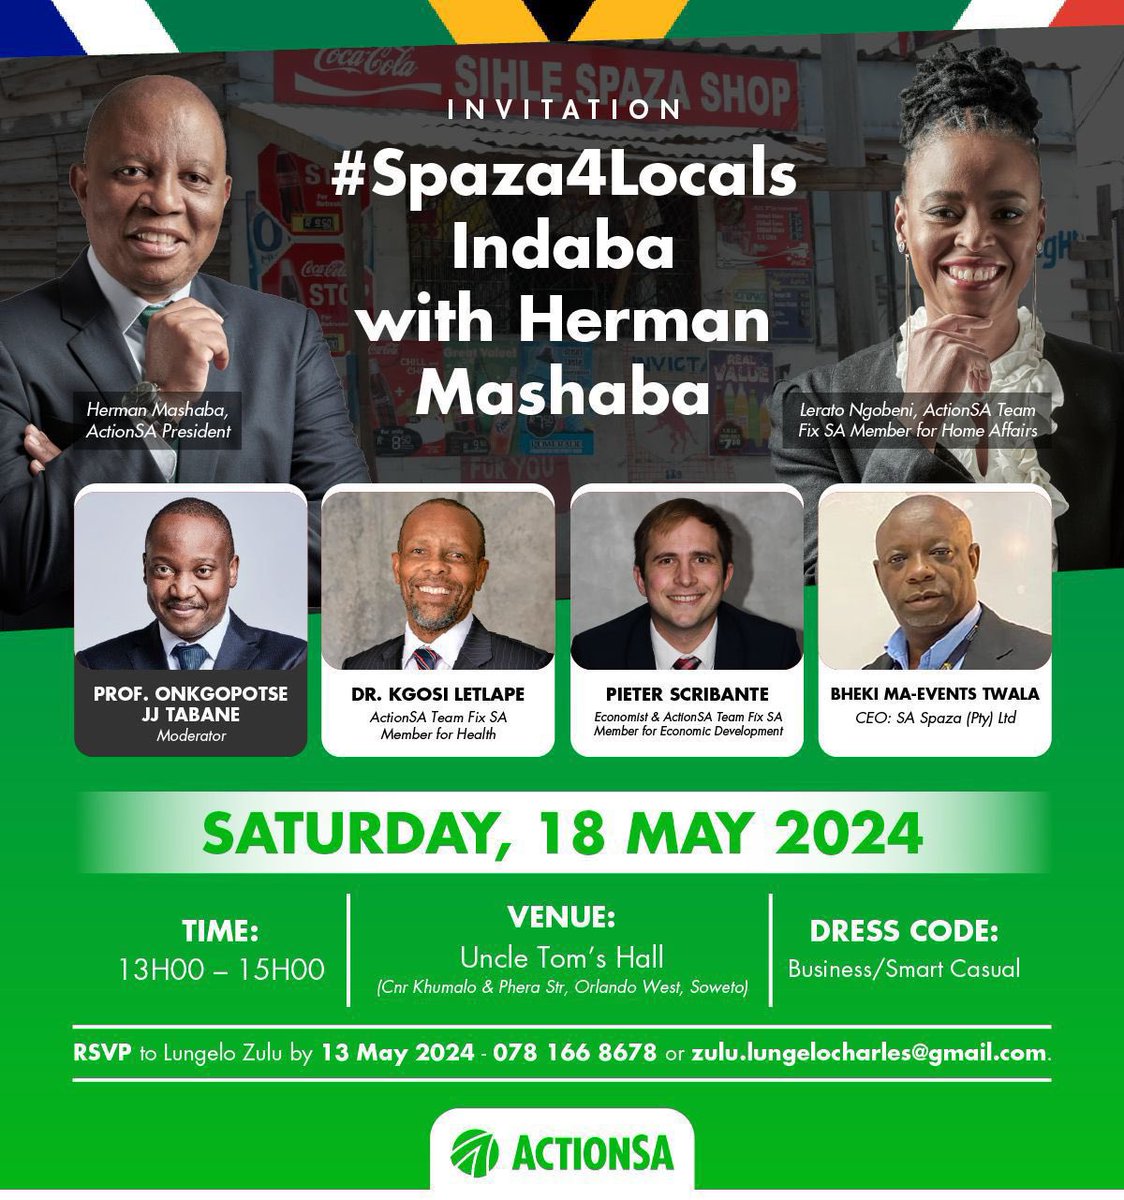 We are calling all business owners to the #Spaza4Locals Indaba with @HermanMashaba today, 13:00-15:00 at the Uncle Tom's Hall in Orlando West, Soweto.   

#Spaza4Locals #LetActionLead